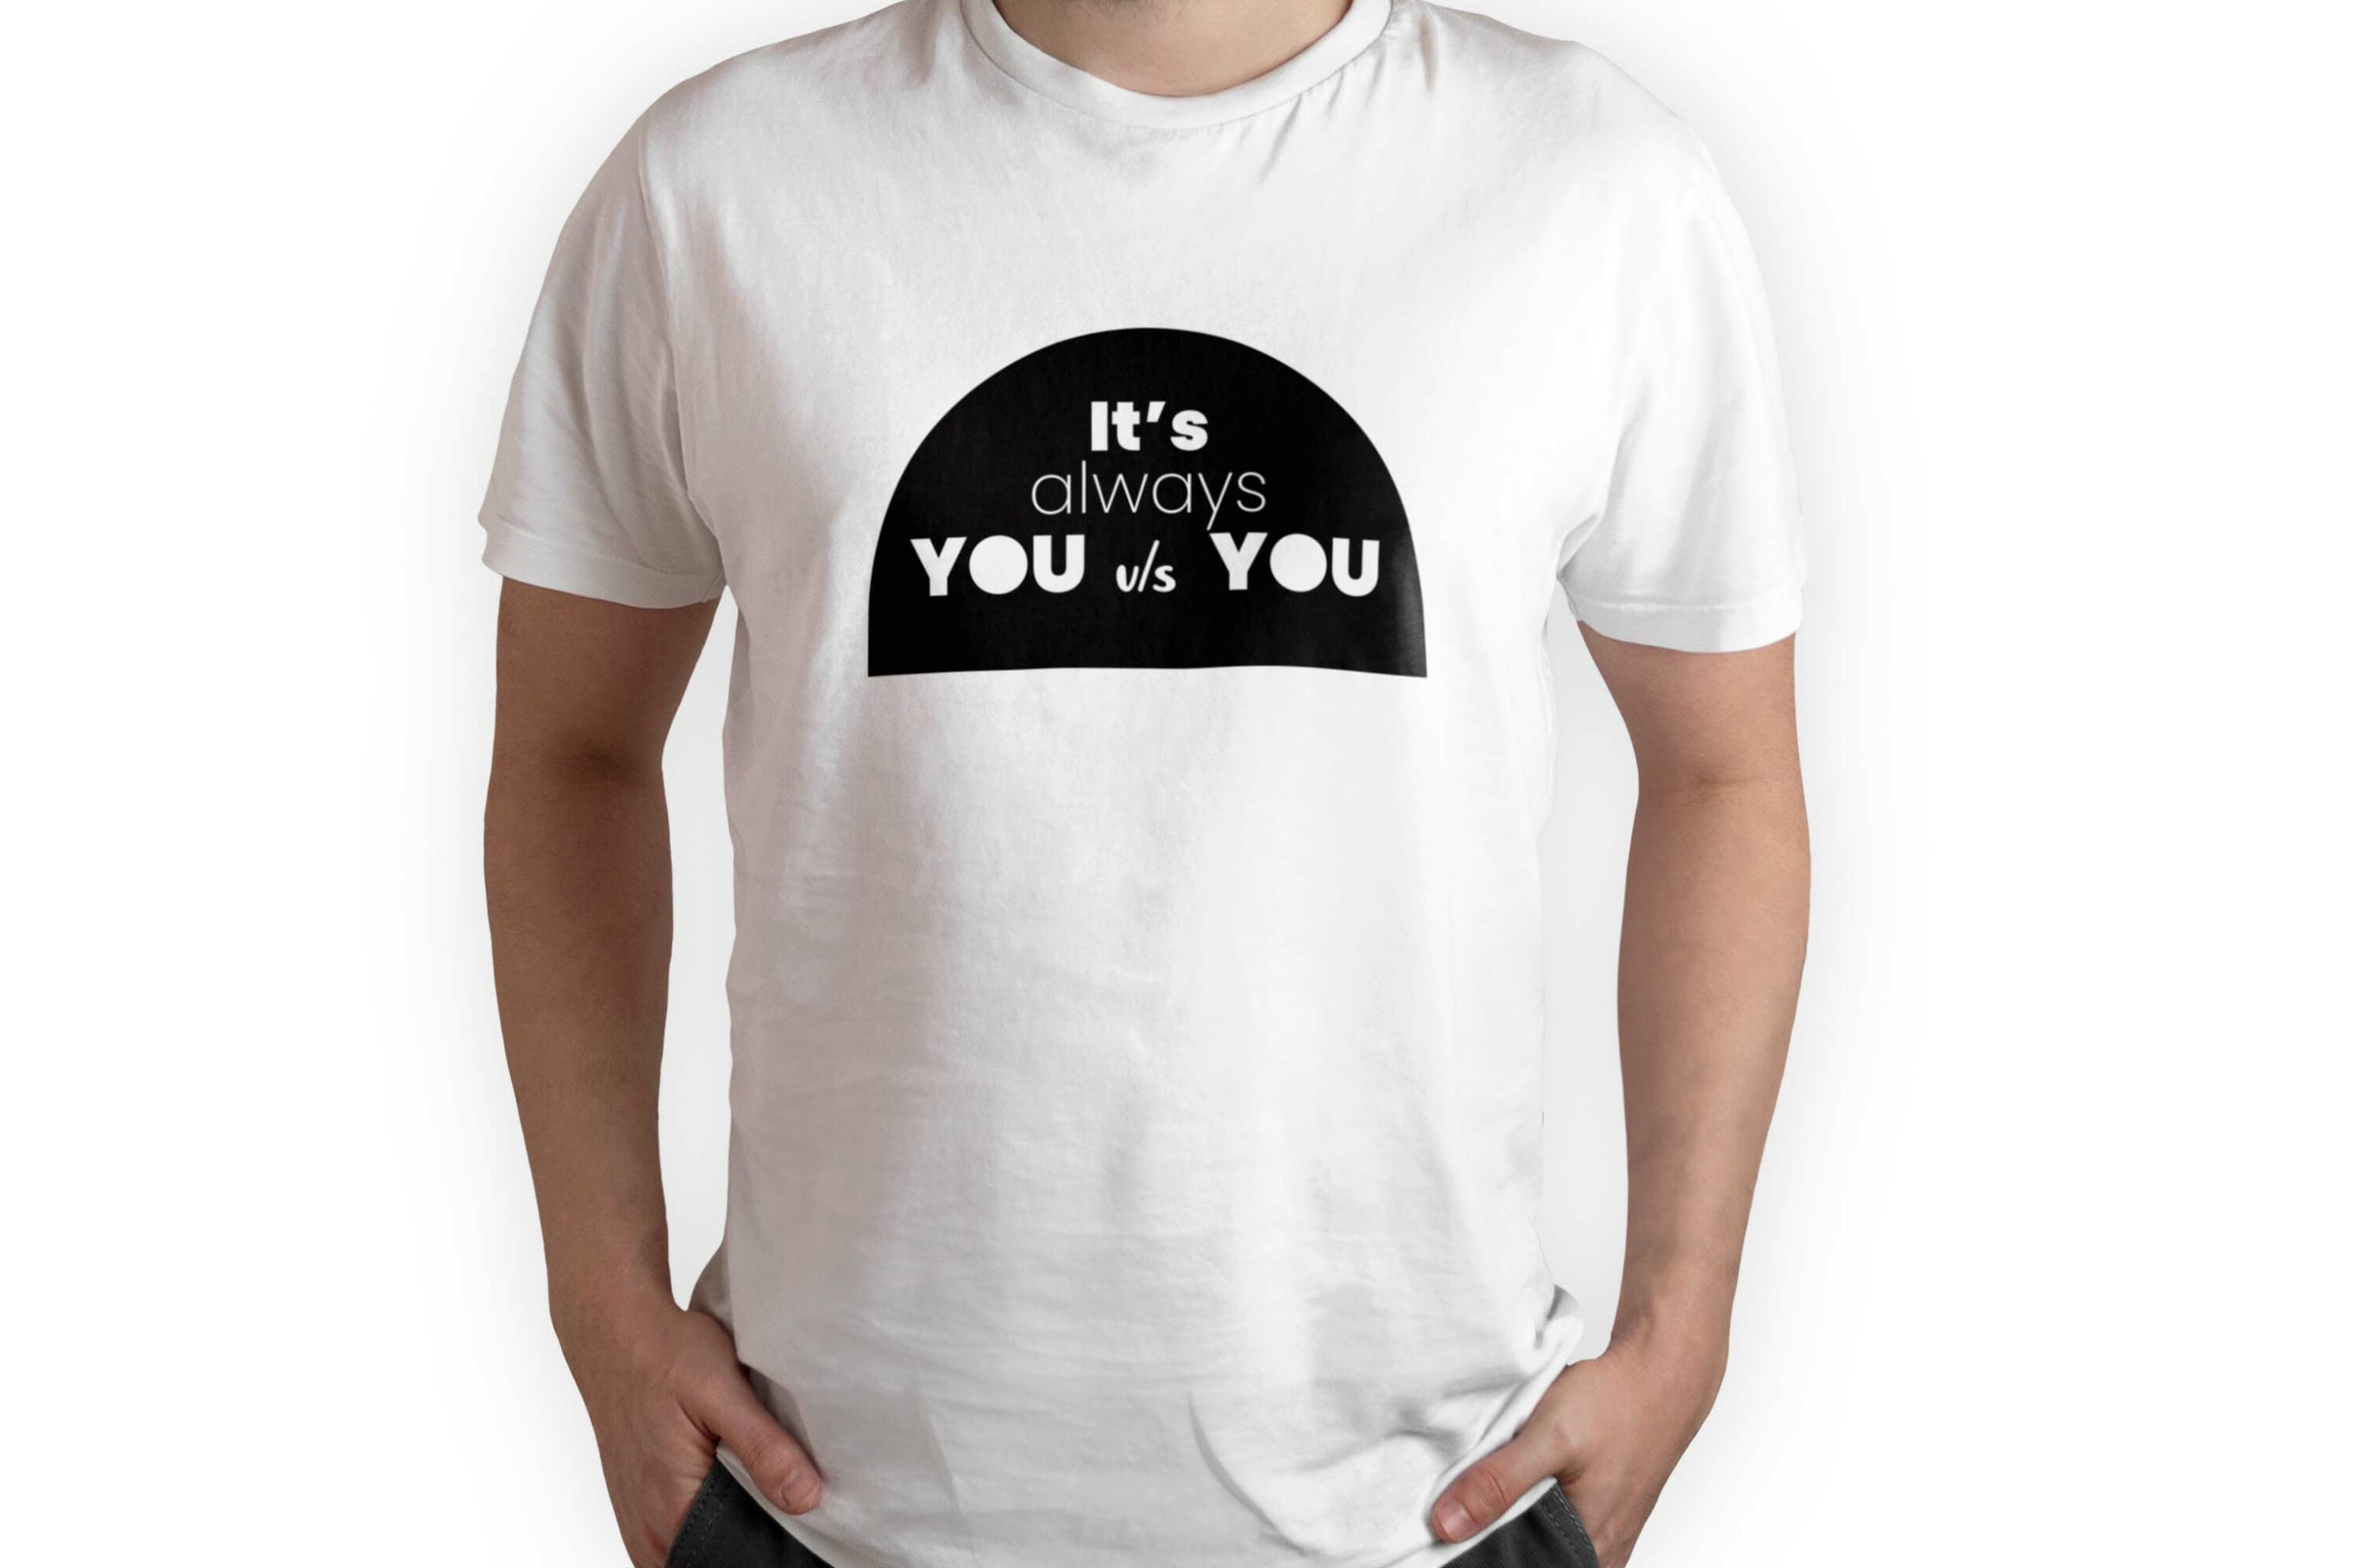 Bundle of 156 T-shirt Designs with Fitness Quotes, it's always you.